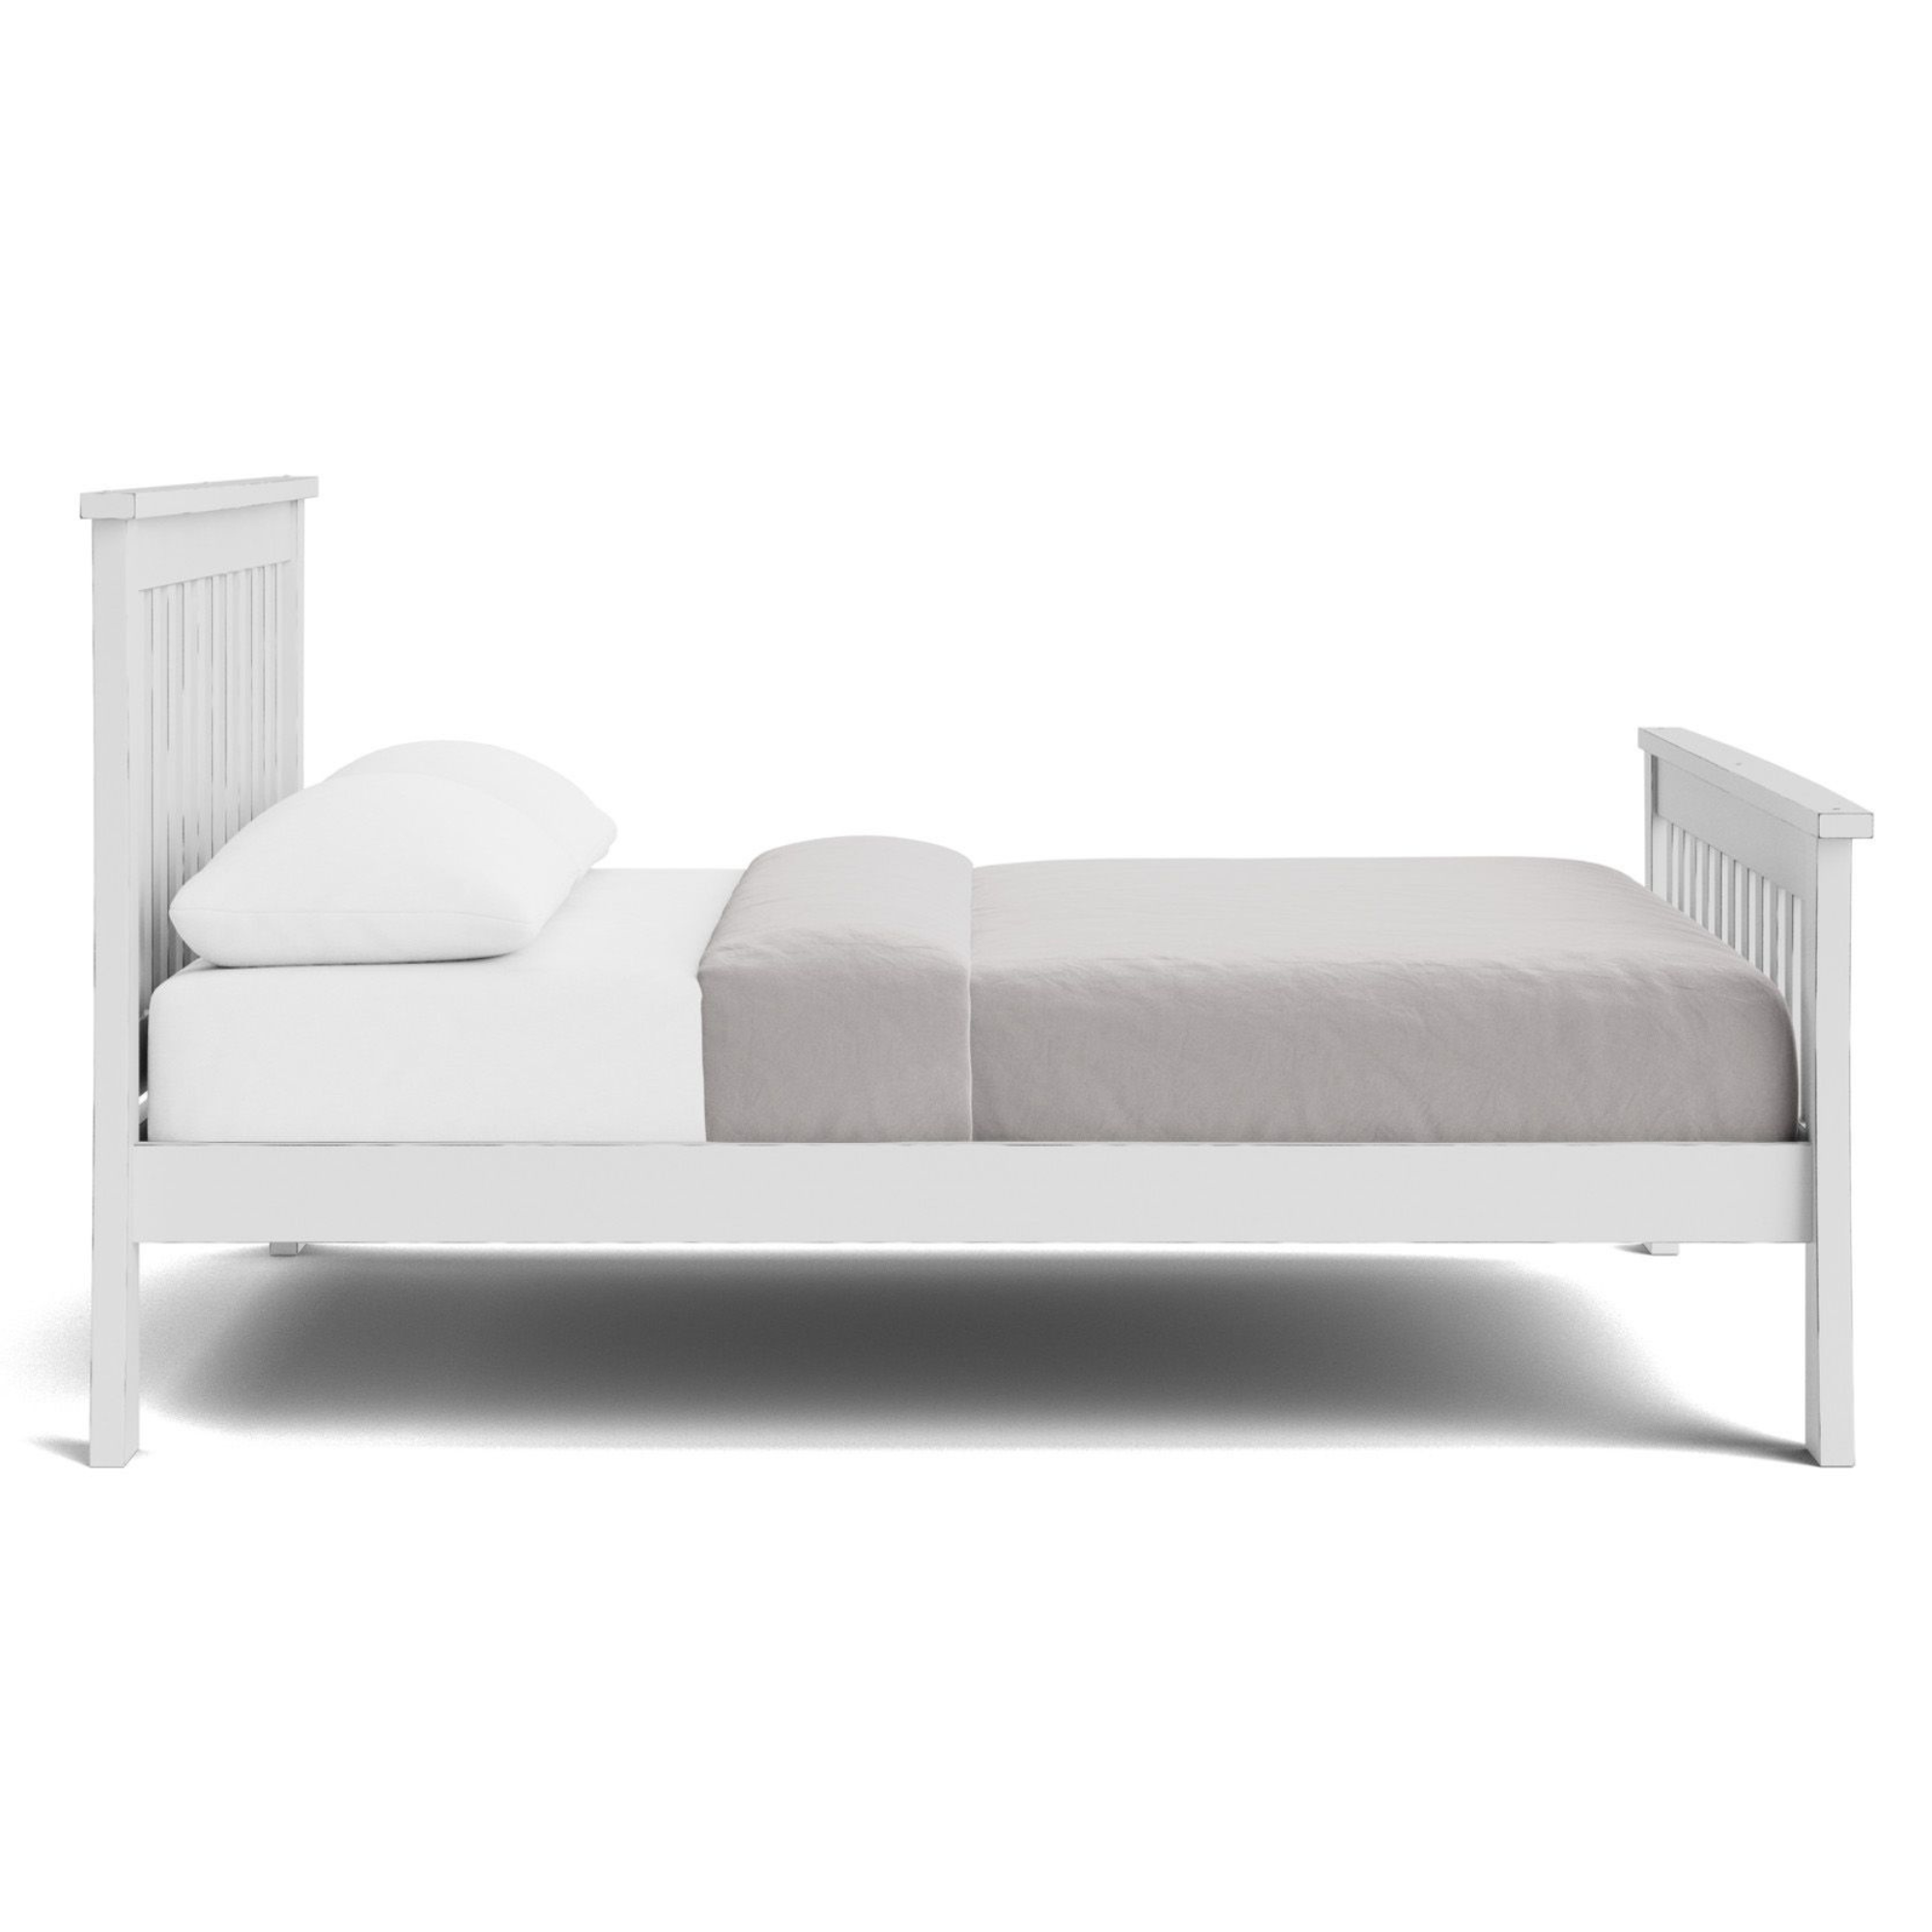 AMBROSE SLAT BED WITH HIGH FOOT | ALL SIZES | NZ MADE BEDROOM FURNITURE